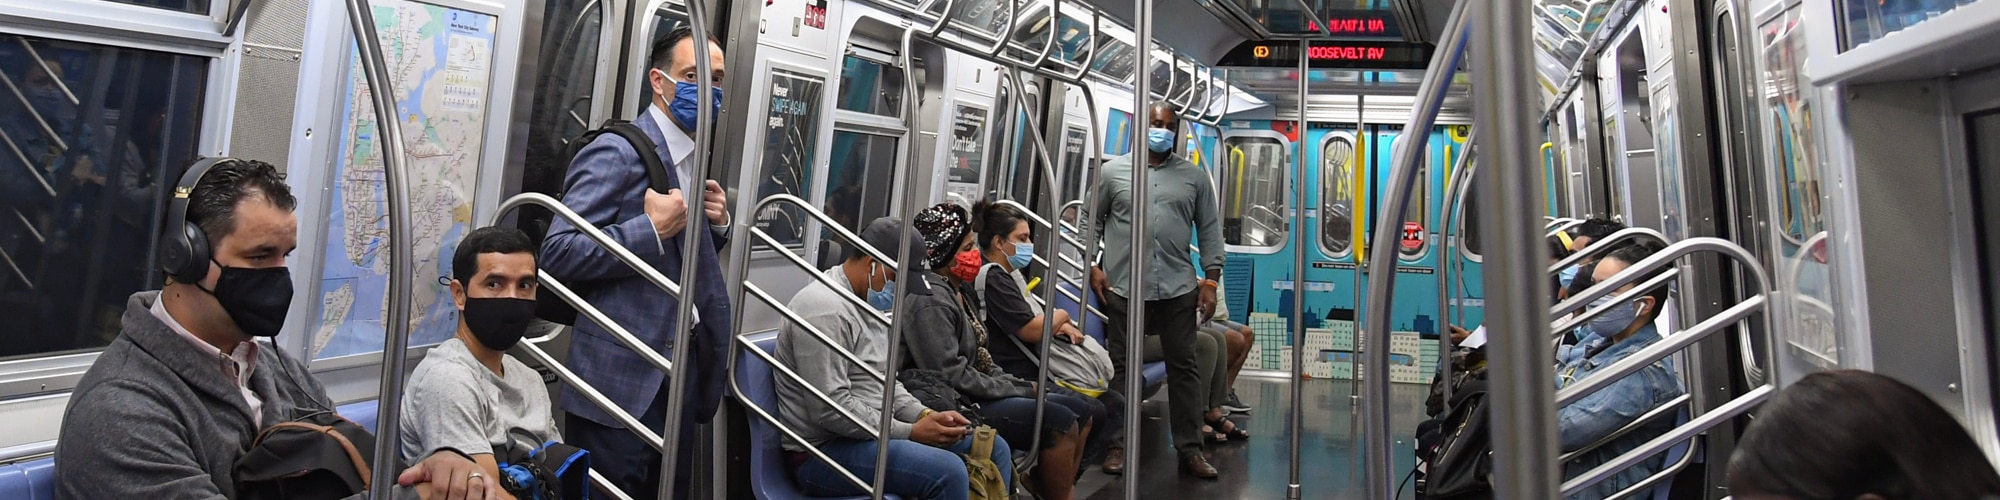 People wearing masks sit and stand on a subway train. The car isn’t crowded and there are a few empty seats.